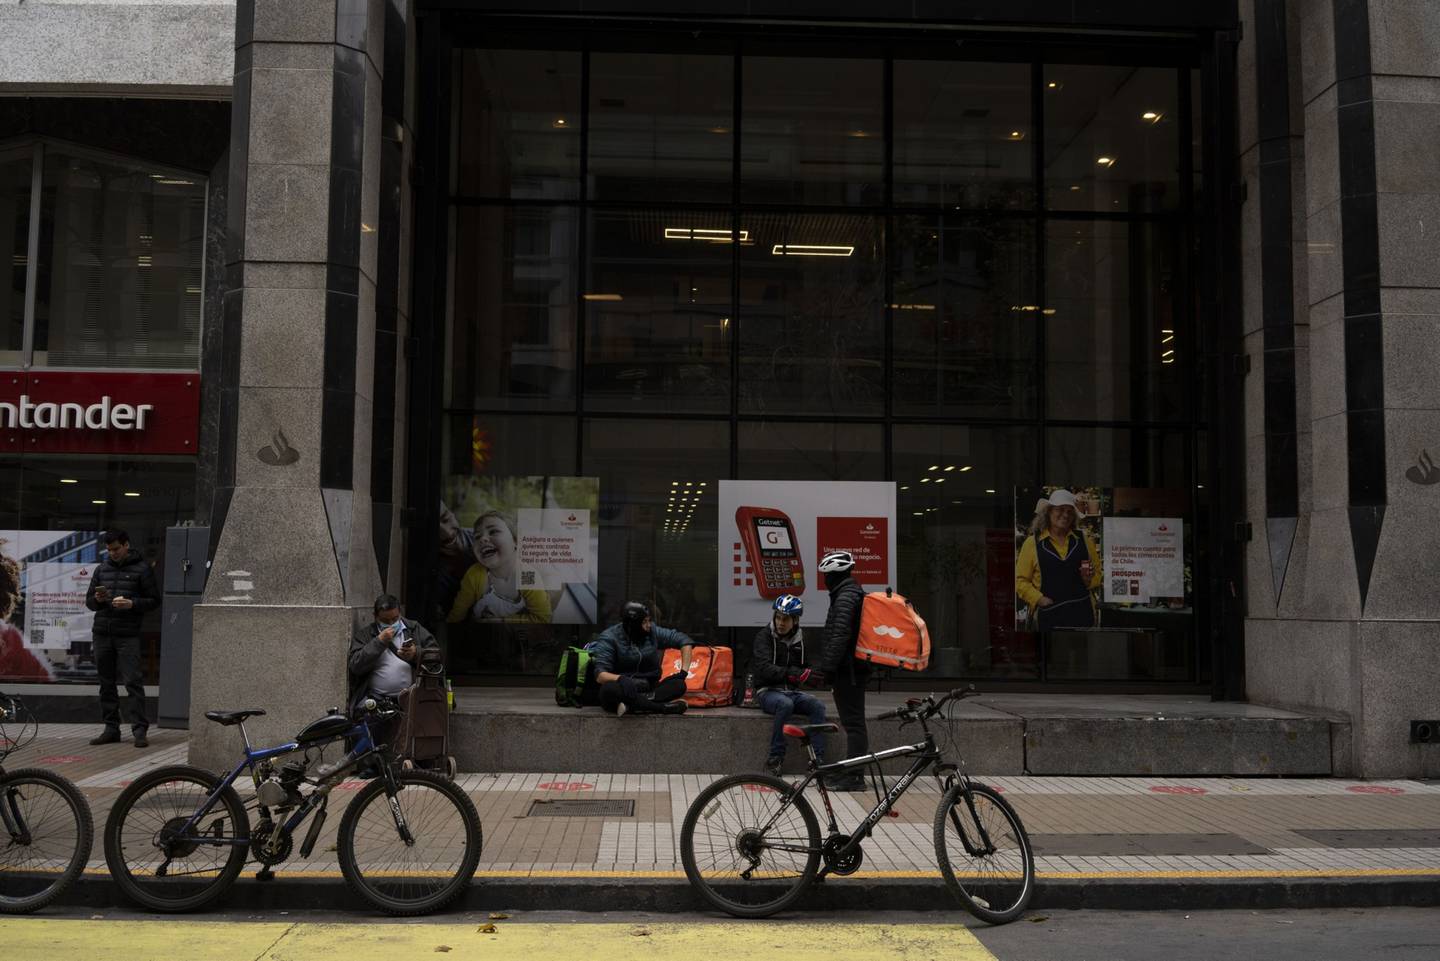 Rappi food delivery workers in Santiago, Chile, on Wednesday, July 13, 2022. Chile's central bank is likely to raise its key interest rate by at least half a percentage point Wednesday as a slump in the peso fuels inflation that is already running at the fastest pace in almost three decades. Photographer: Tamara Merino/Bloomberg